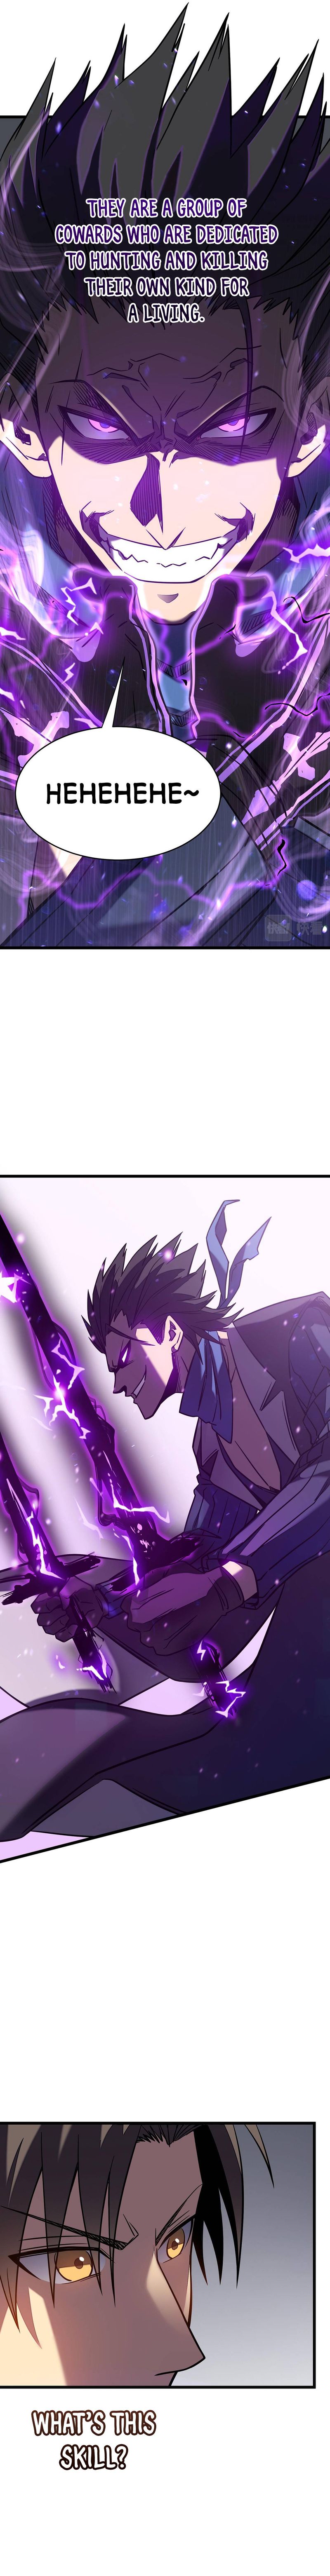 I Walk On A Road To Slay Enemies In My Way In Other World Chapter 9 Page 15